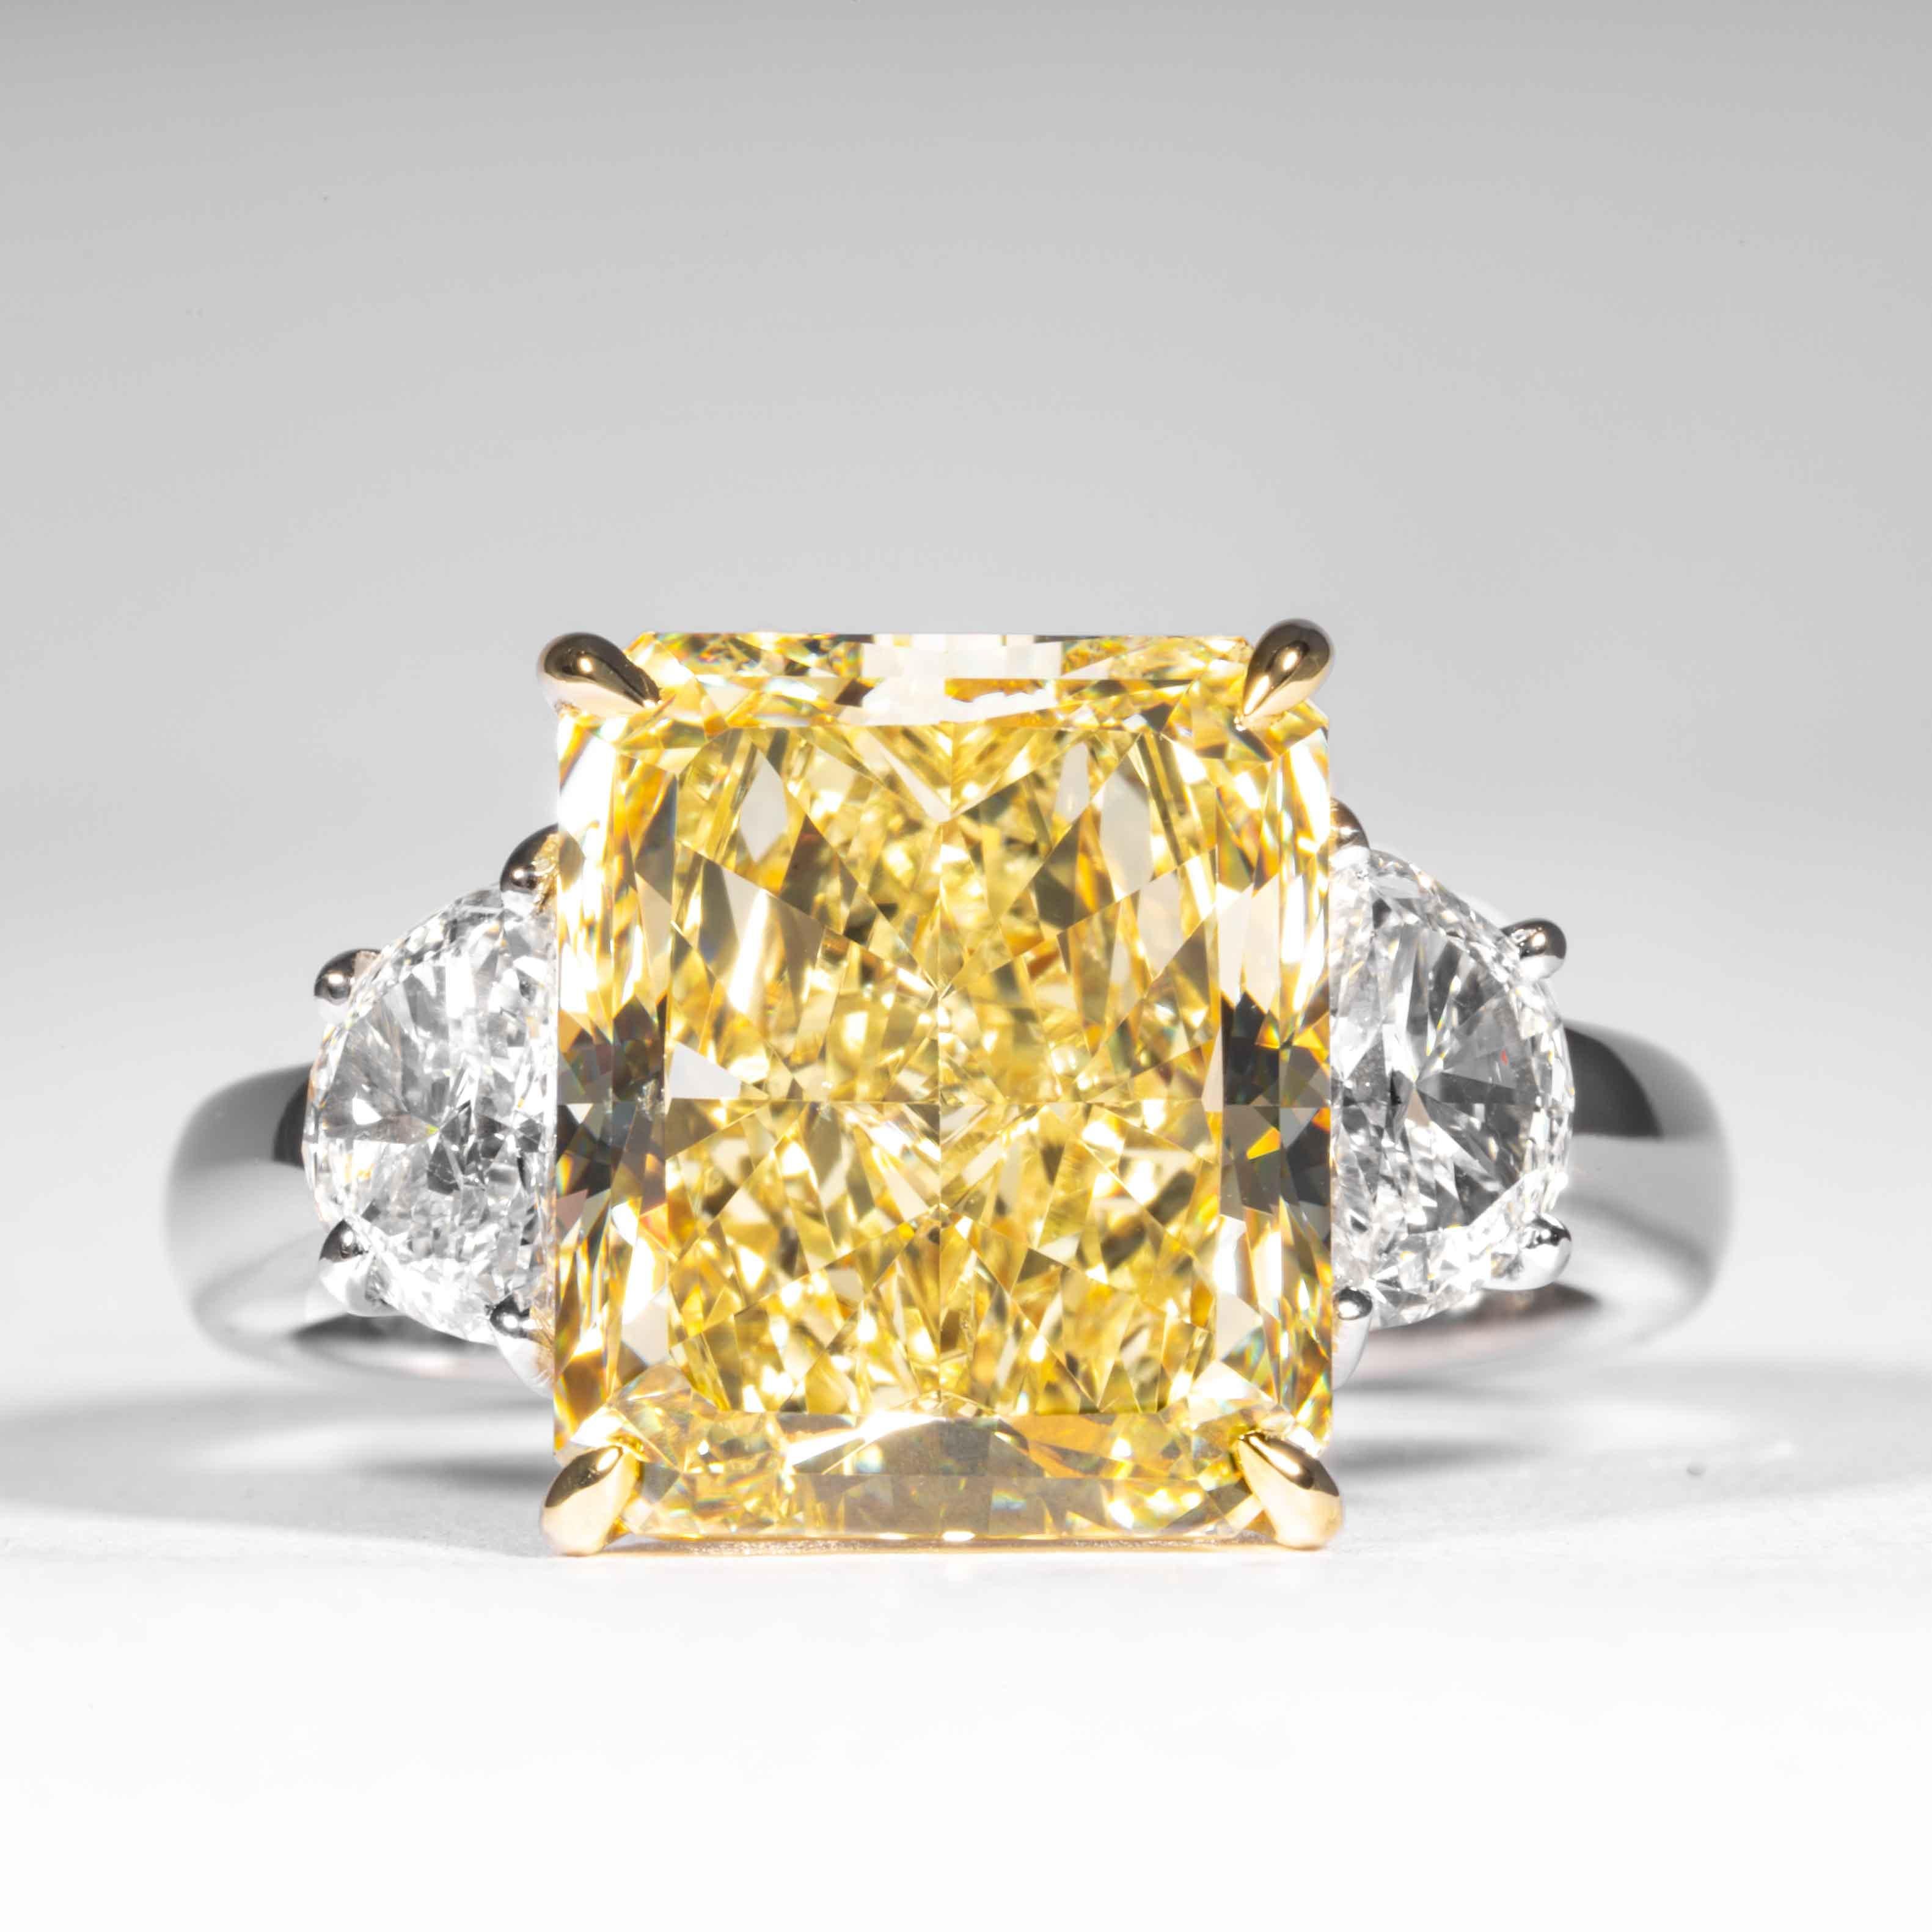 This fancy yellow radiant cut diamond is offered by Shreve, Crump & Low.  This fancy yellow radiant diamond is custom set in a handcrafted Shreve, Crump & Low platinum and 18 karat yellow gold 3 stone ring consisting of 1 radiant cut yellow diamond